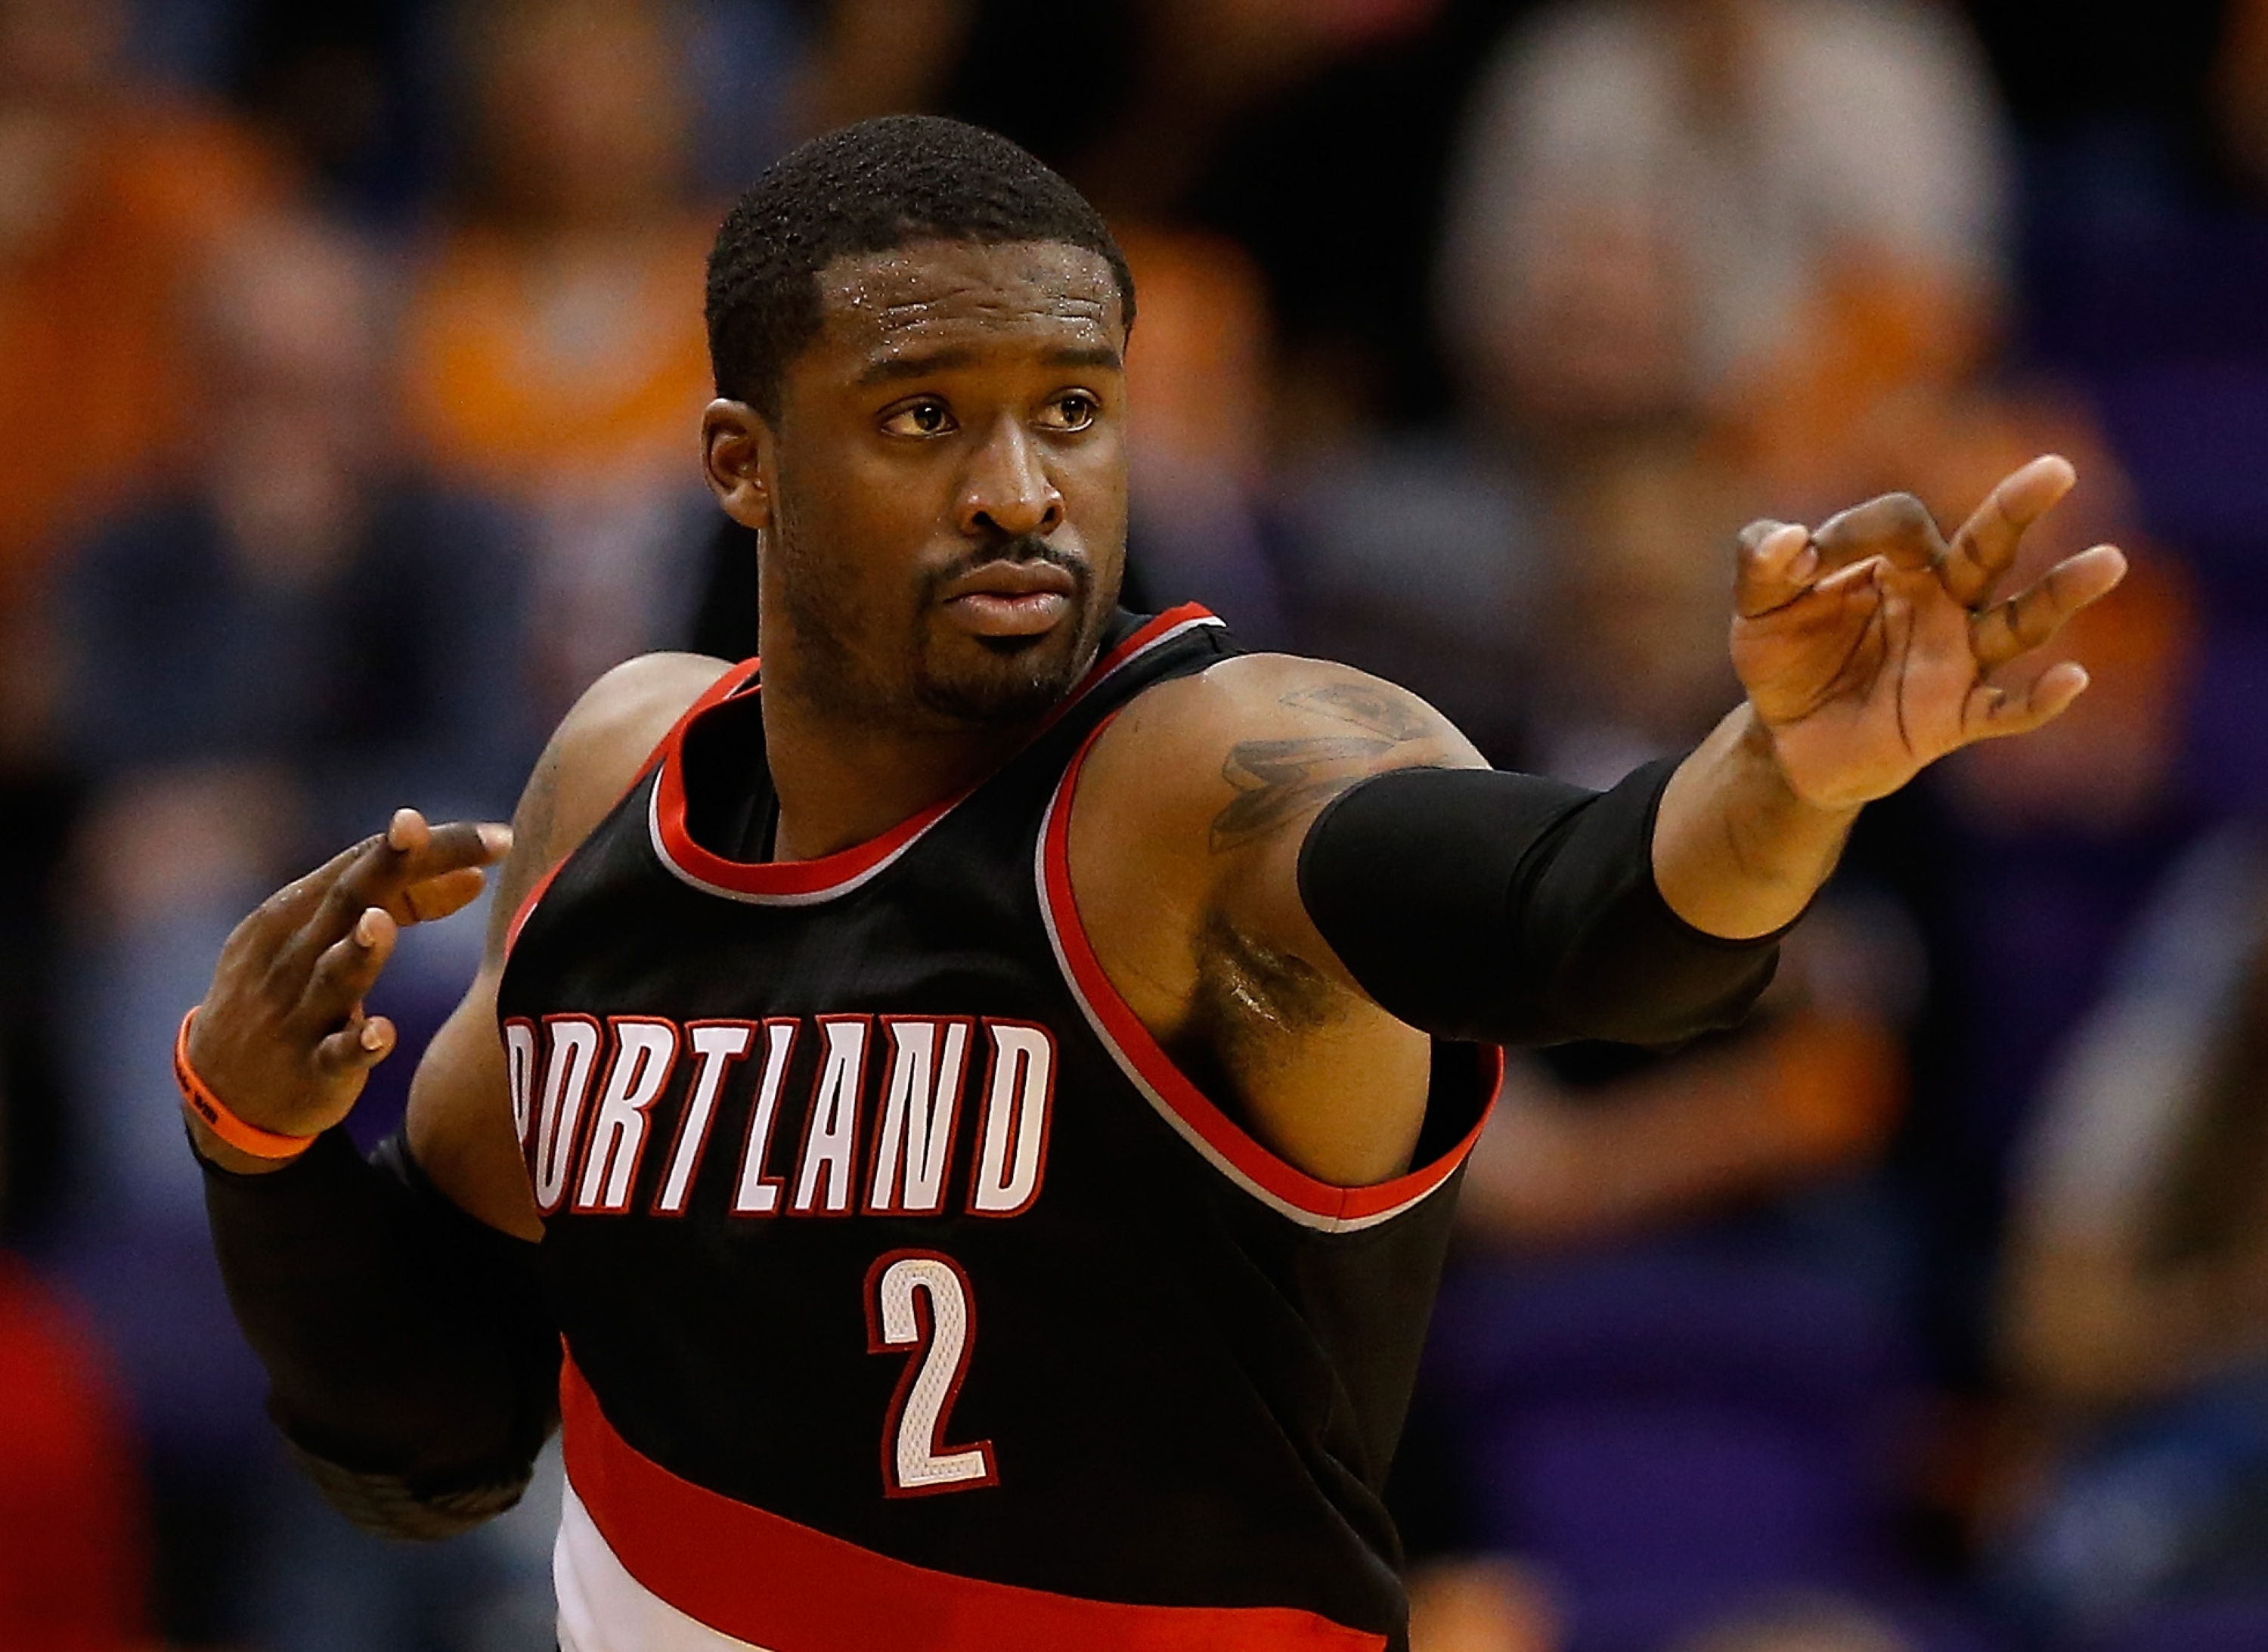 Is Wesley Matthews worth $17.5 million per season after his Achilles injury? (Christian Petersen/Getty Images)